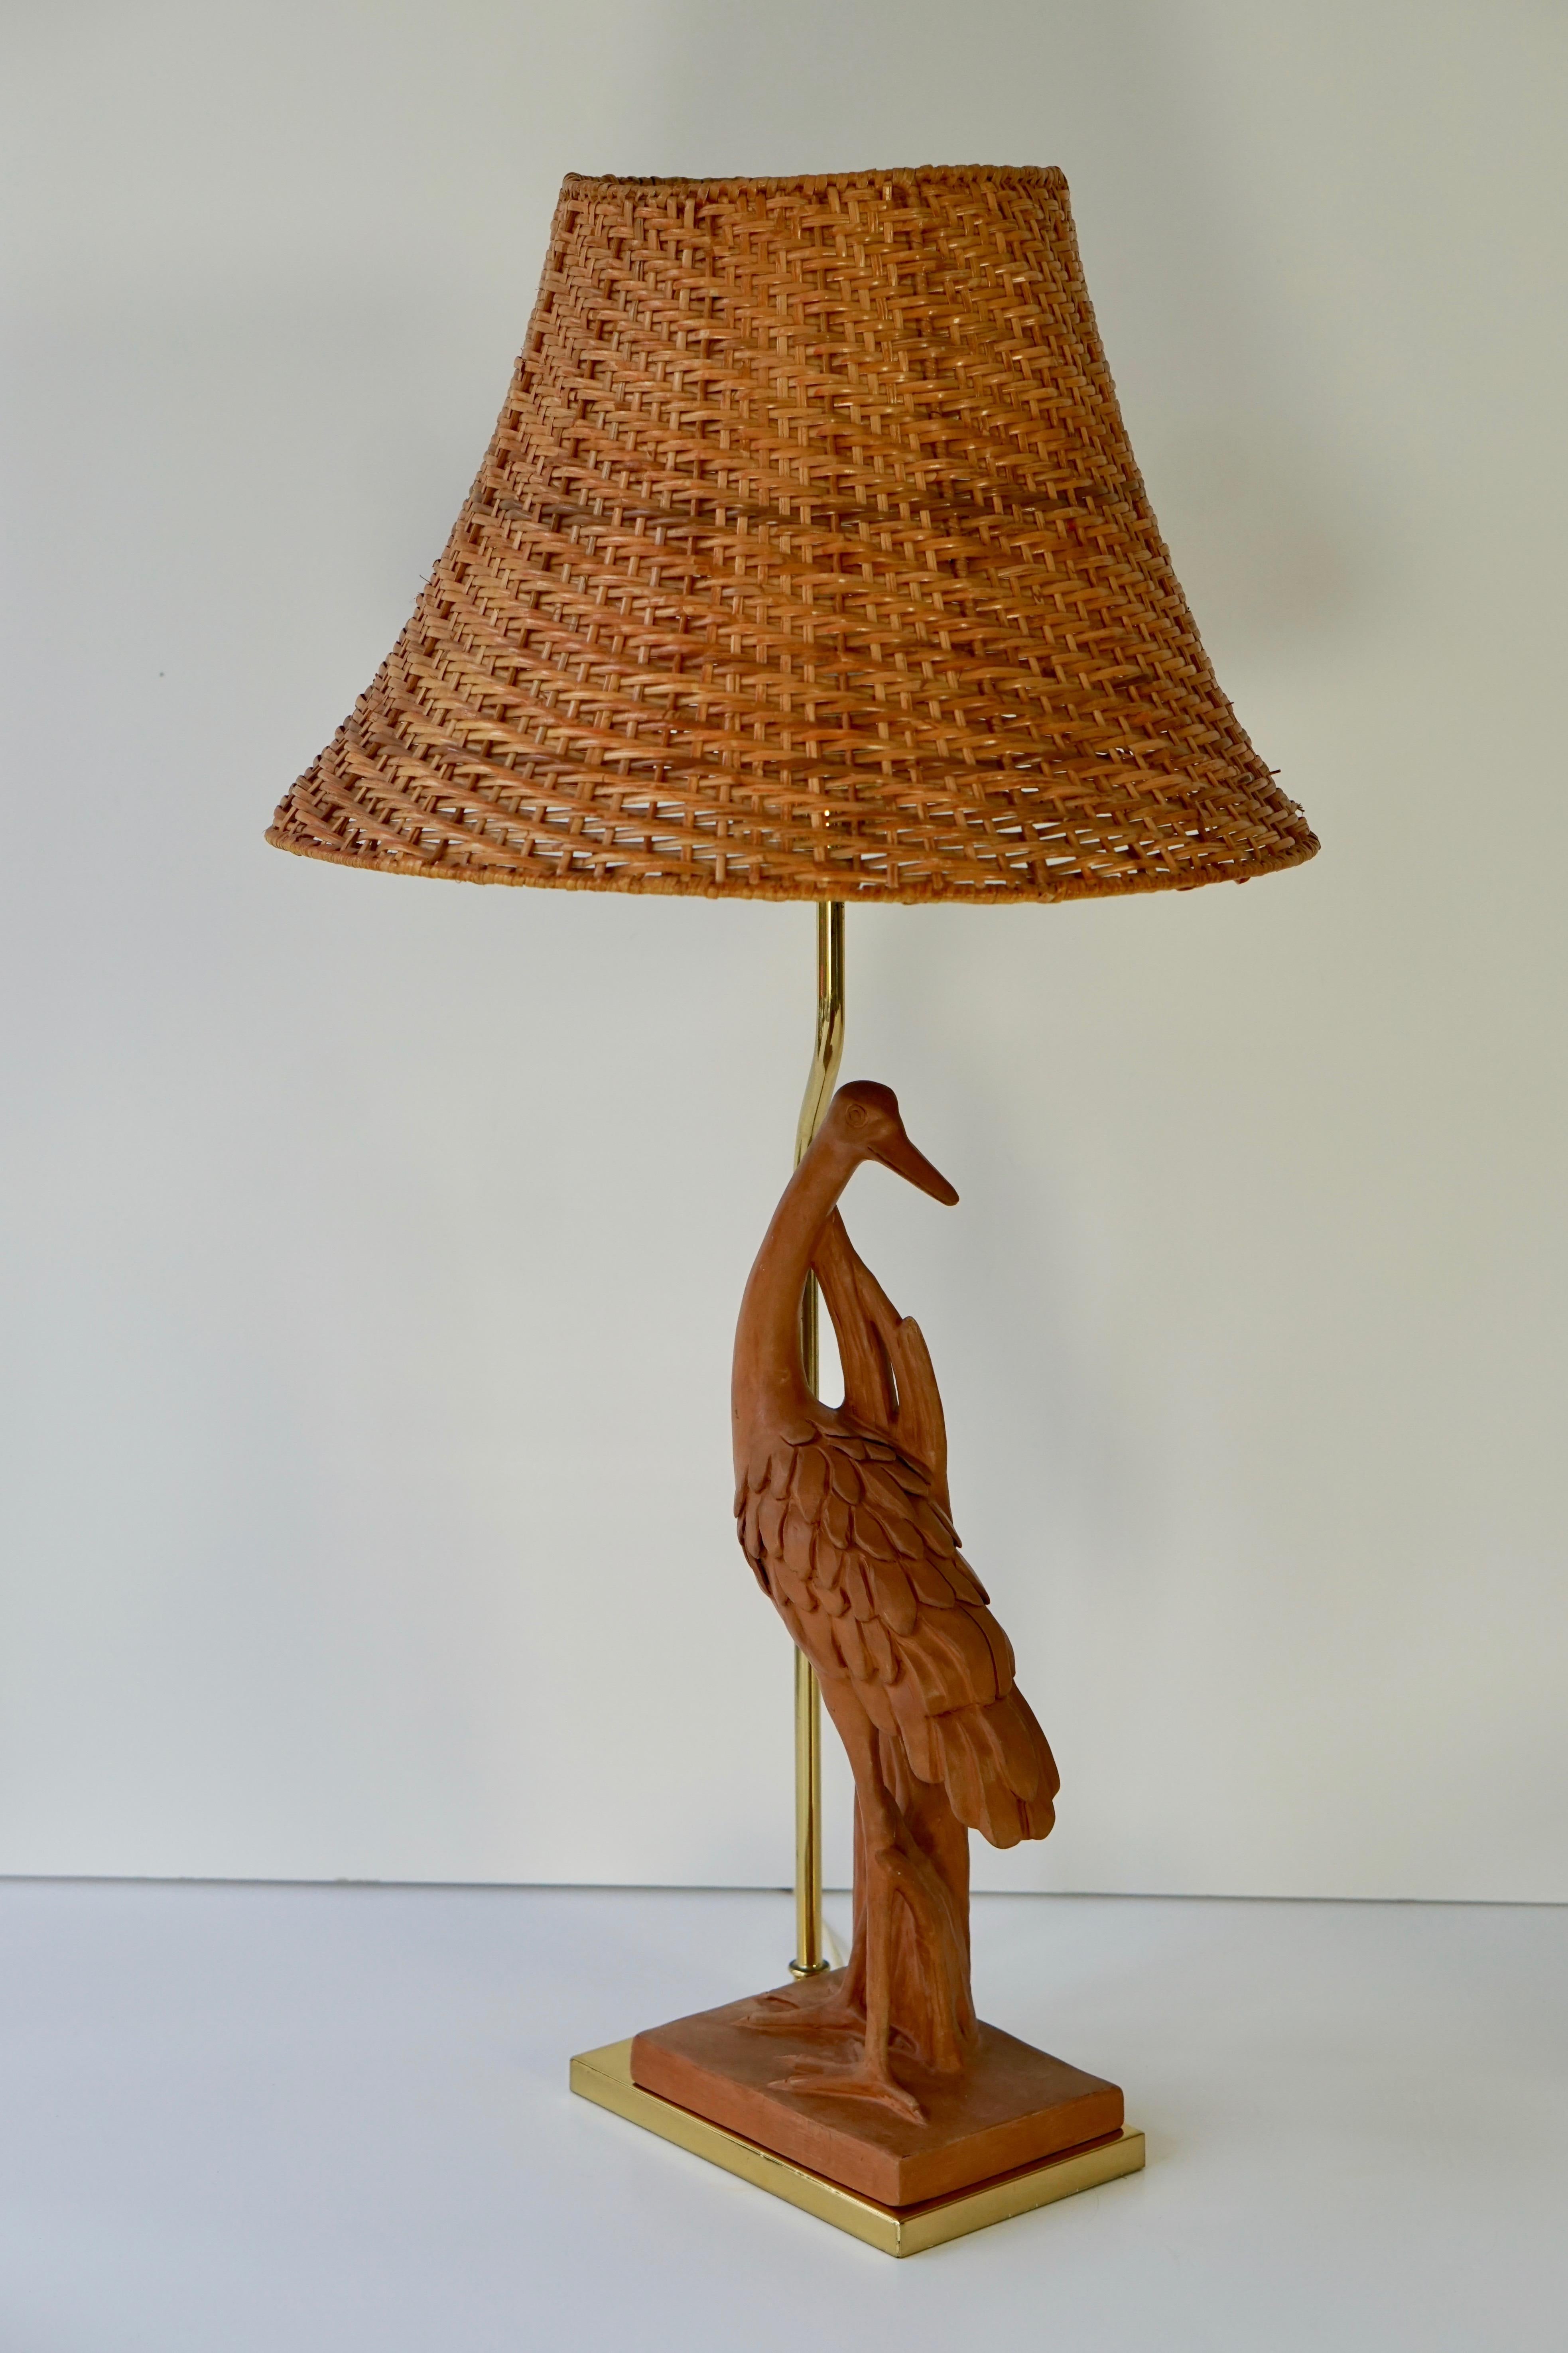 Terracotta Hollywood Regency Heron table lamp by D Sonch. At the focal point of this vintage table lamp stands a heron in terracotta.
The exotic subject would suit a wide range of decors and the slender form is perfect for a desk, console, side